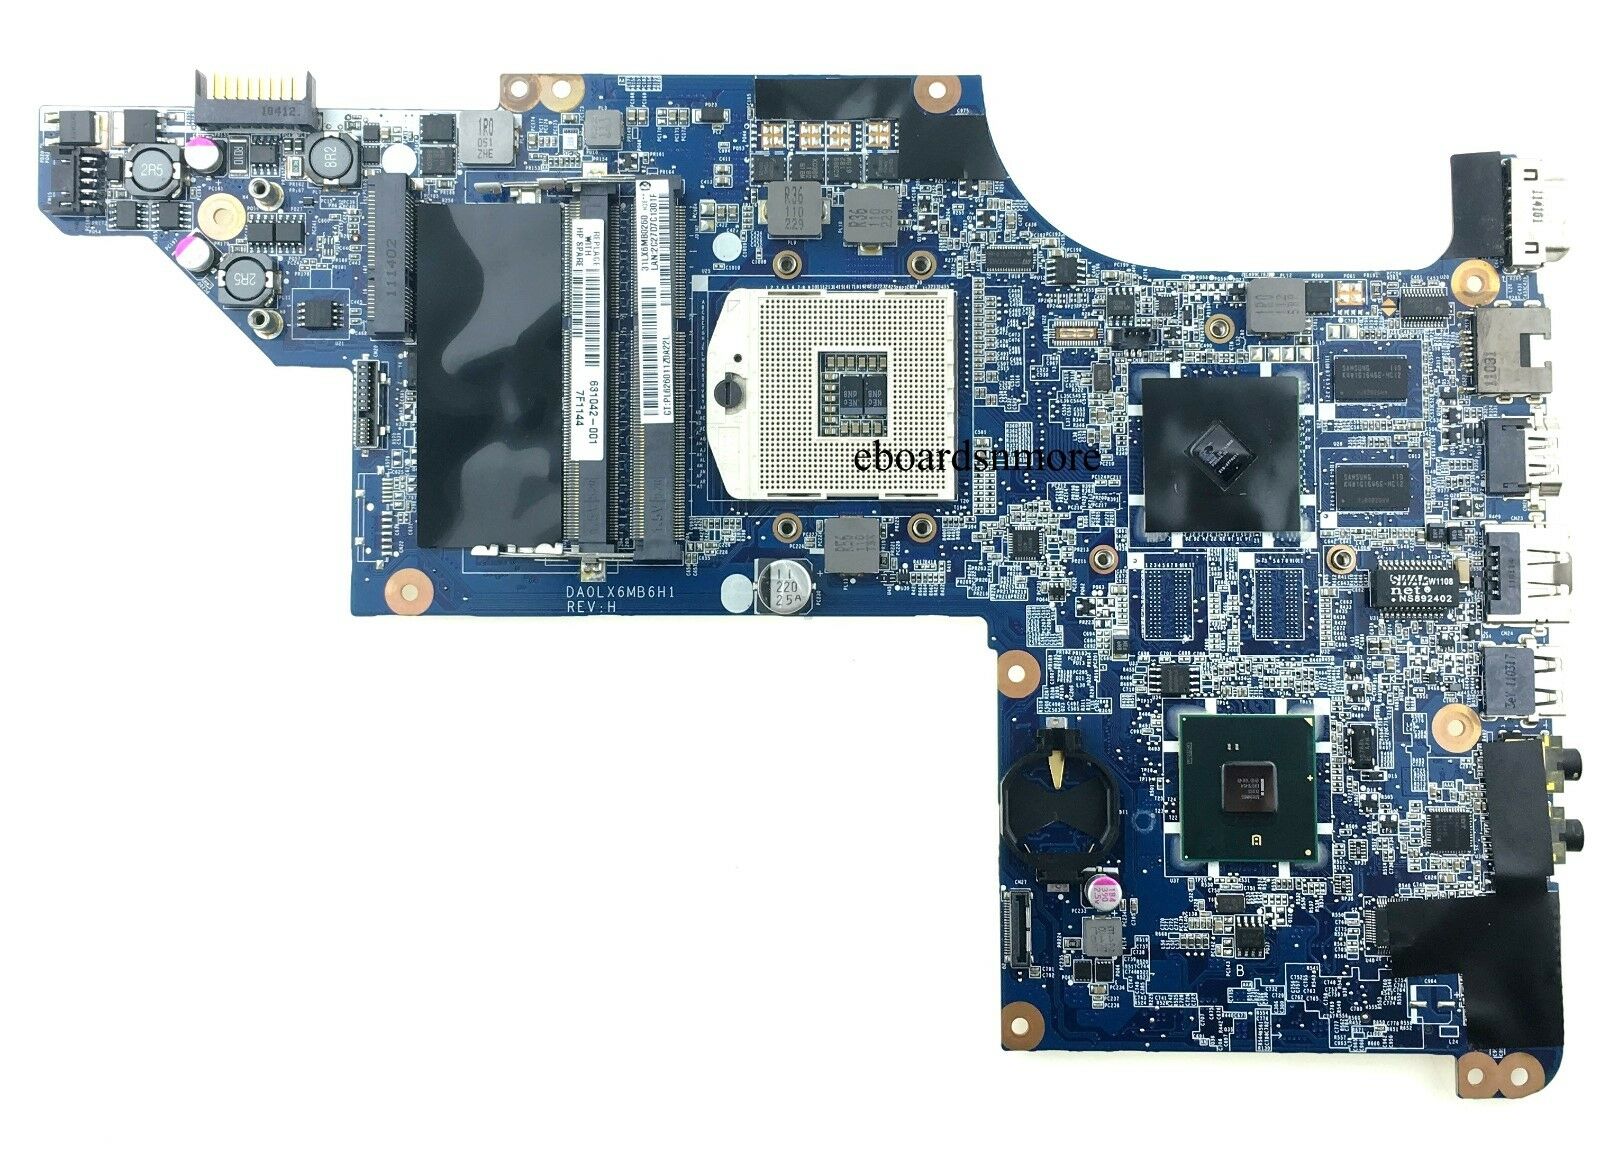 631042-001 Intel S988 Motherboard for HP DV6-3200 laptop, ATI 6370, DDR3 GRD A Compatible CPU Brand: Intel H